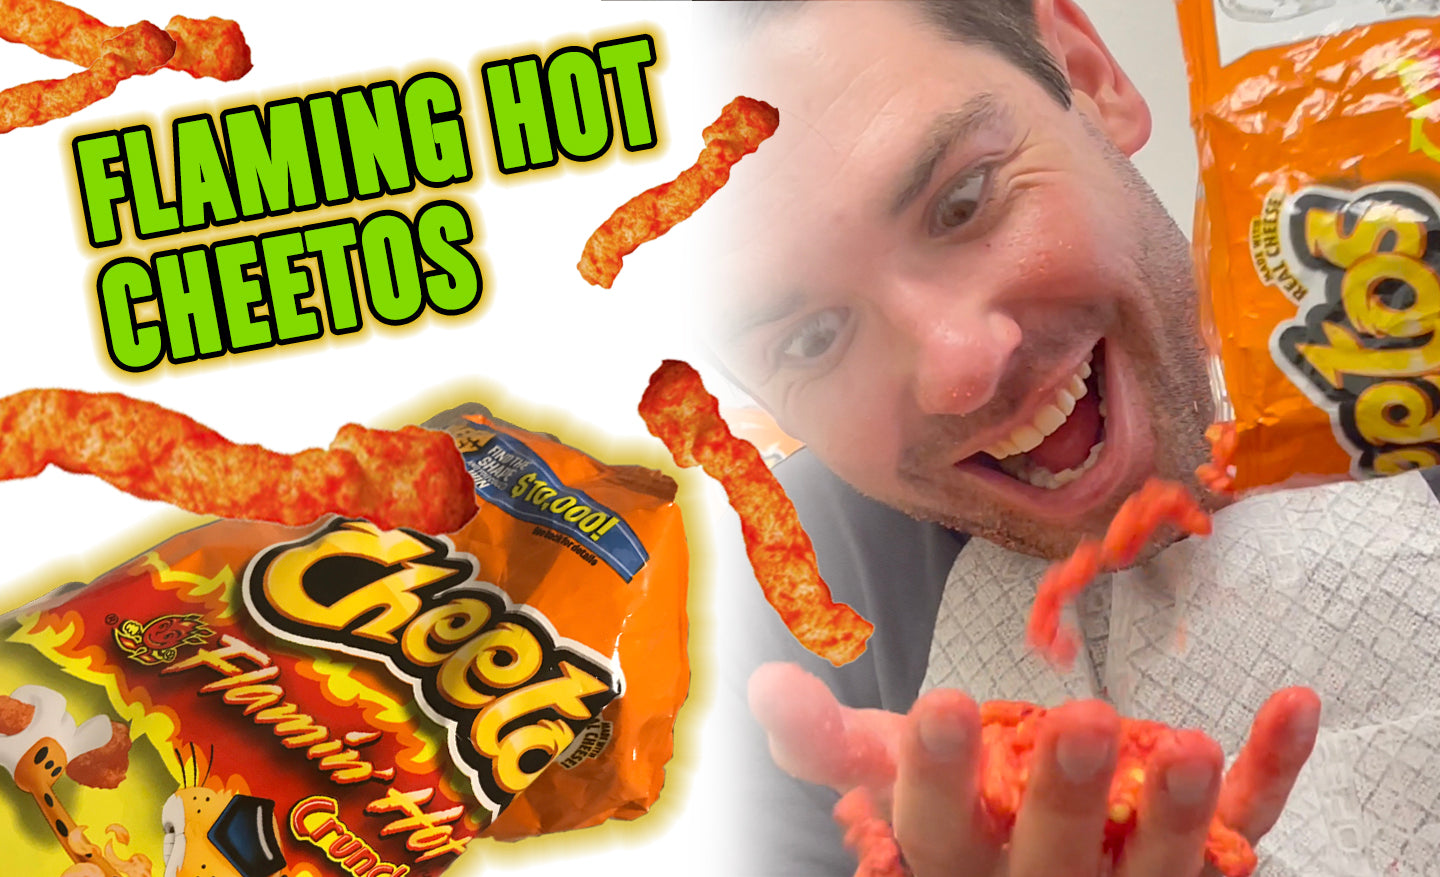 How To Remove Hot Cheeto Stains From Fingers & Hands